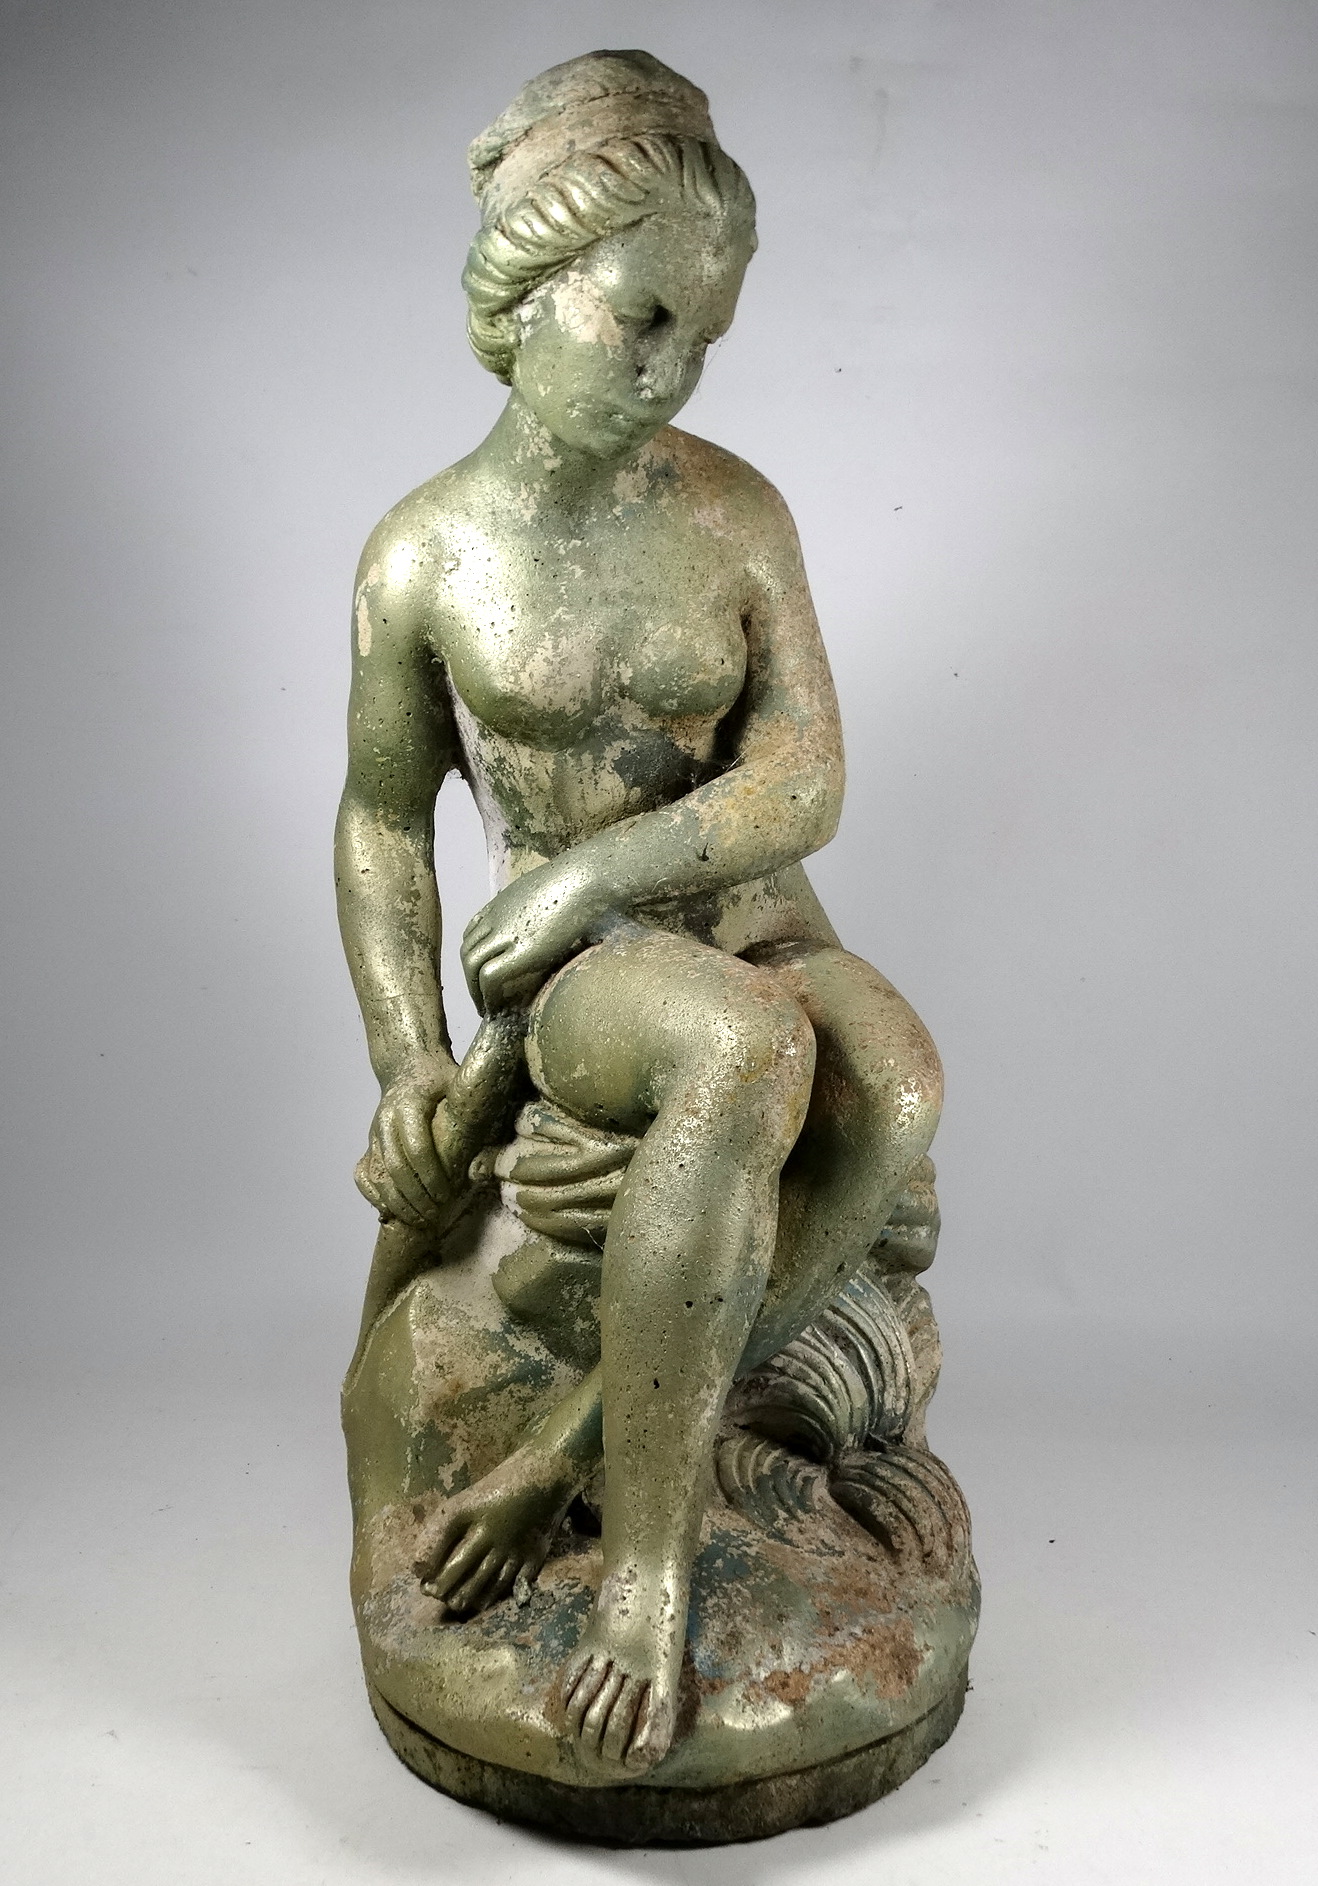 A 20th century reconstituted stone figure of a seated lady - later painted, height 61cm.